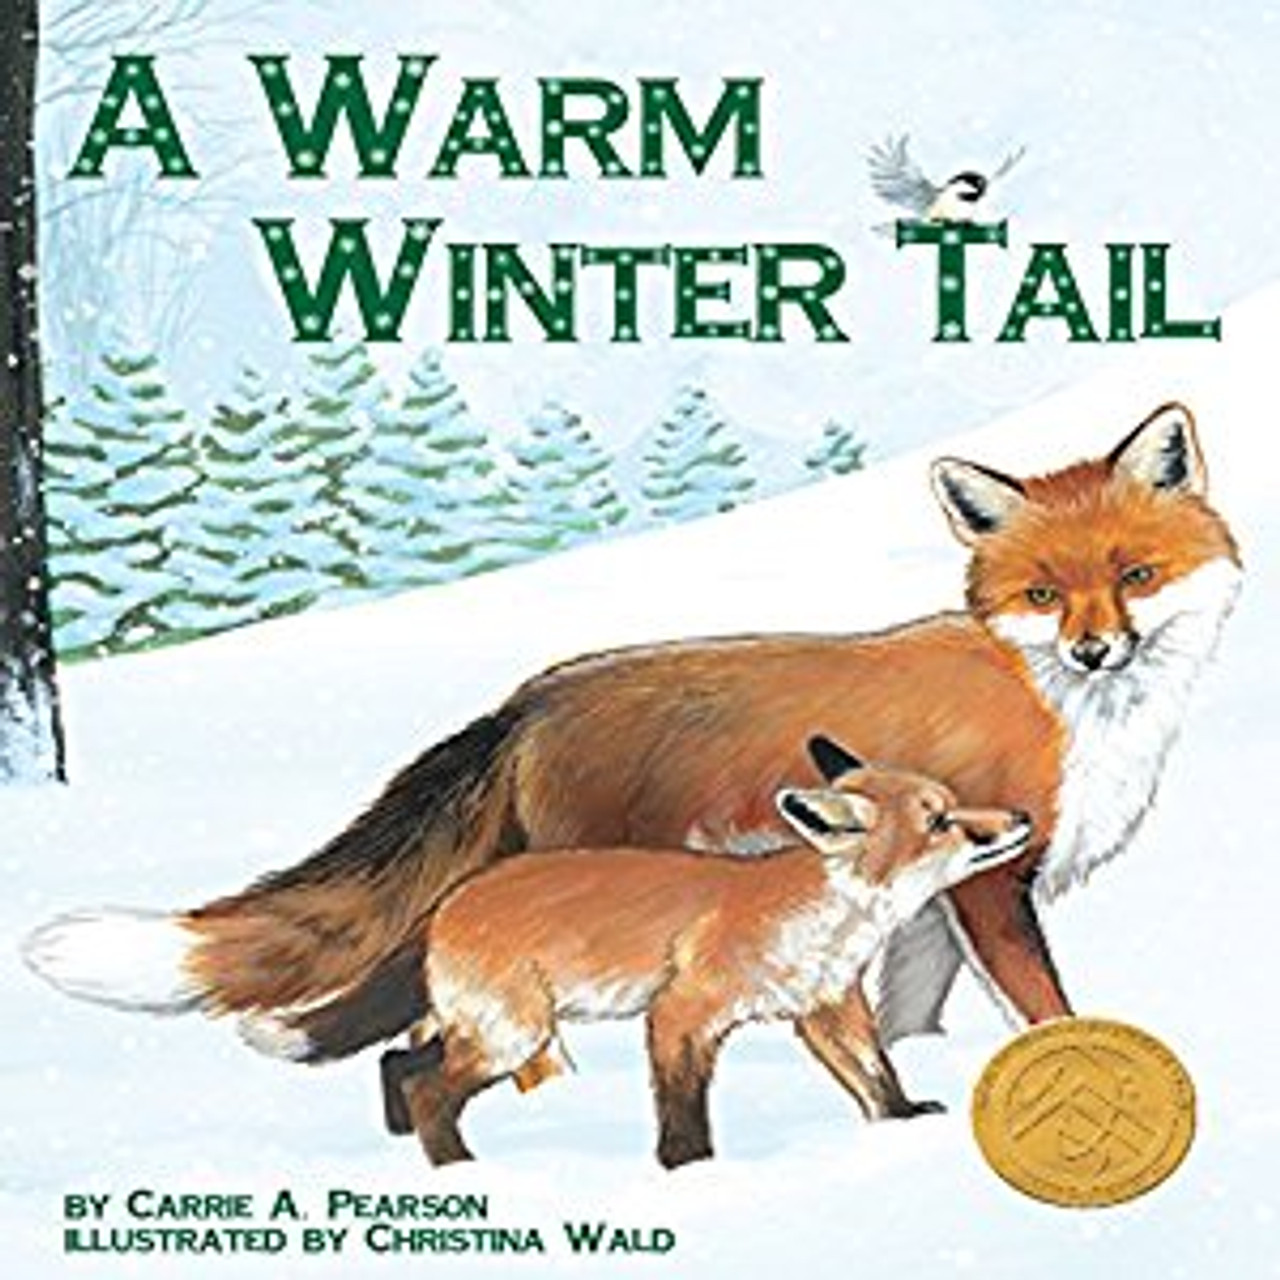 Do you ever wonder how animals stay warm in the winter?  Well, they wonder how humans do too!  In a twist of perspective, wild creatures question if humans use the same winter adaptation strategies that they do.  Do they cuddle together in a tree or fly south to Mexico? Take a look through an animal's eyes and discover the interesting ways that animals cope with the cold winter months throughout this rhythmic story.